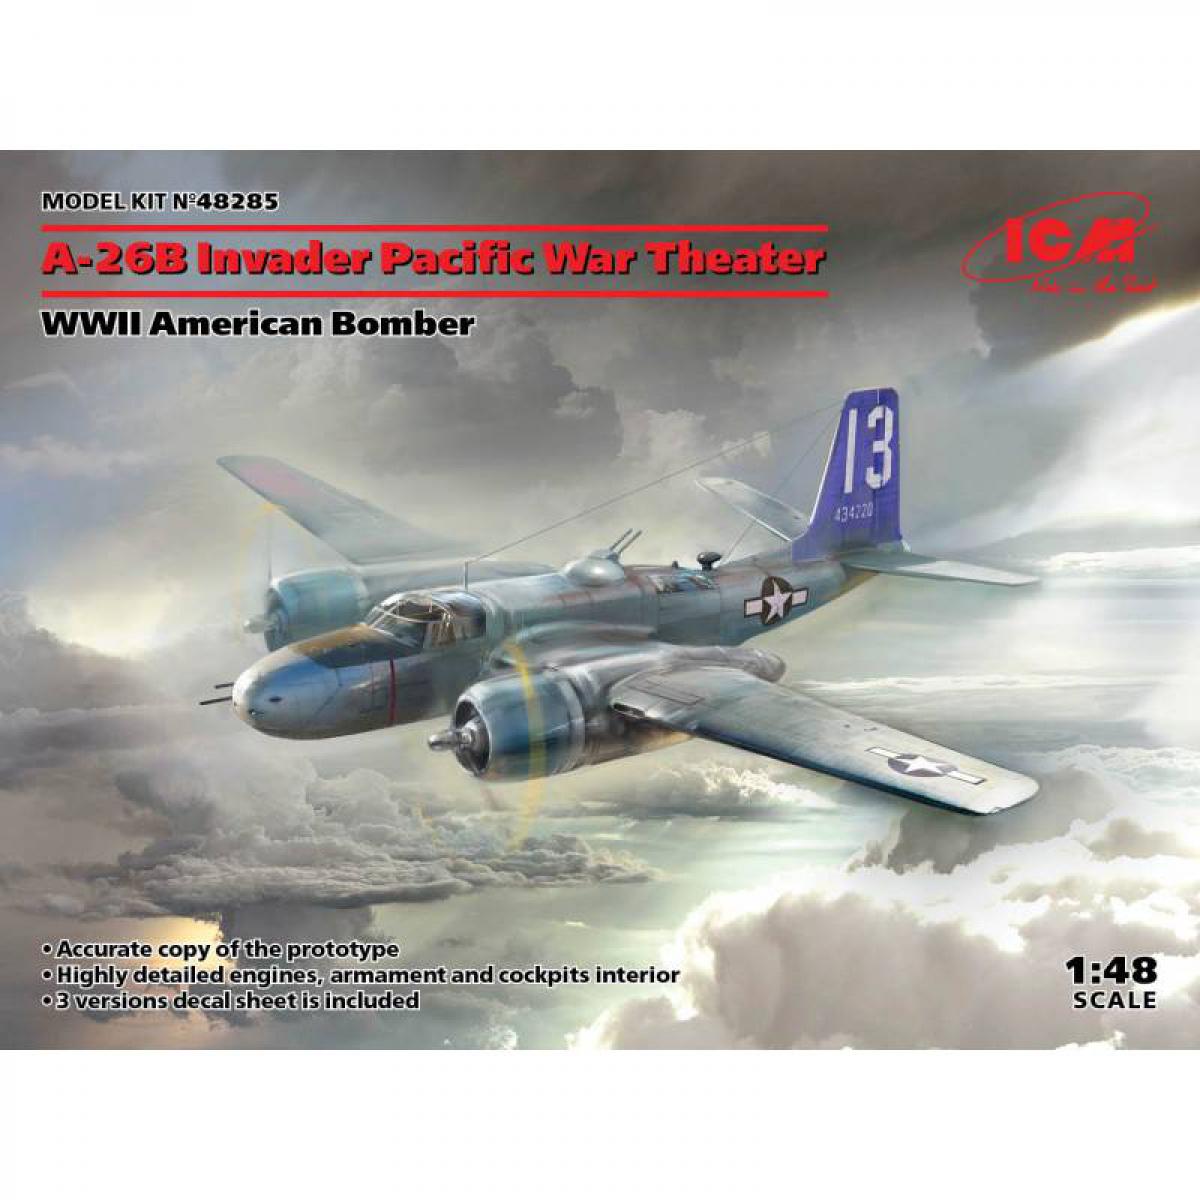 Icm - Maquette Avion A-26Ð² Invader Pacific War Theater Wwii American Bomber - Avions